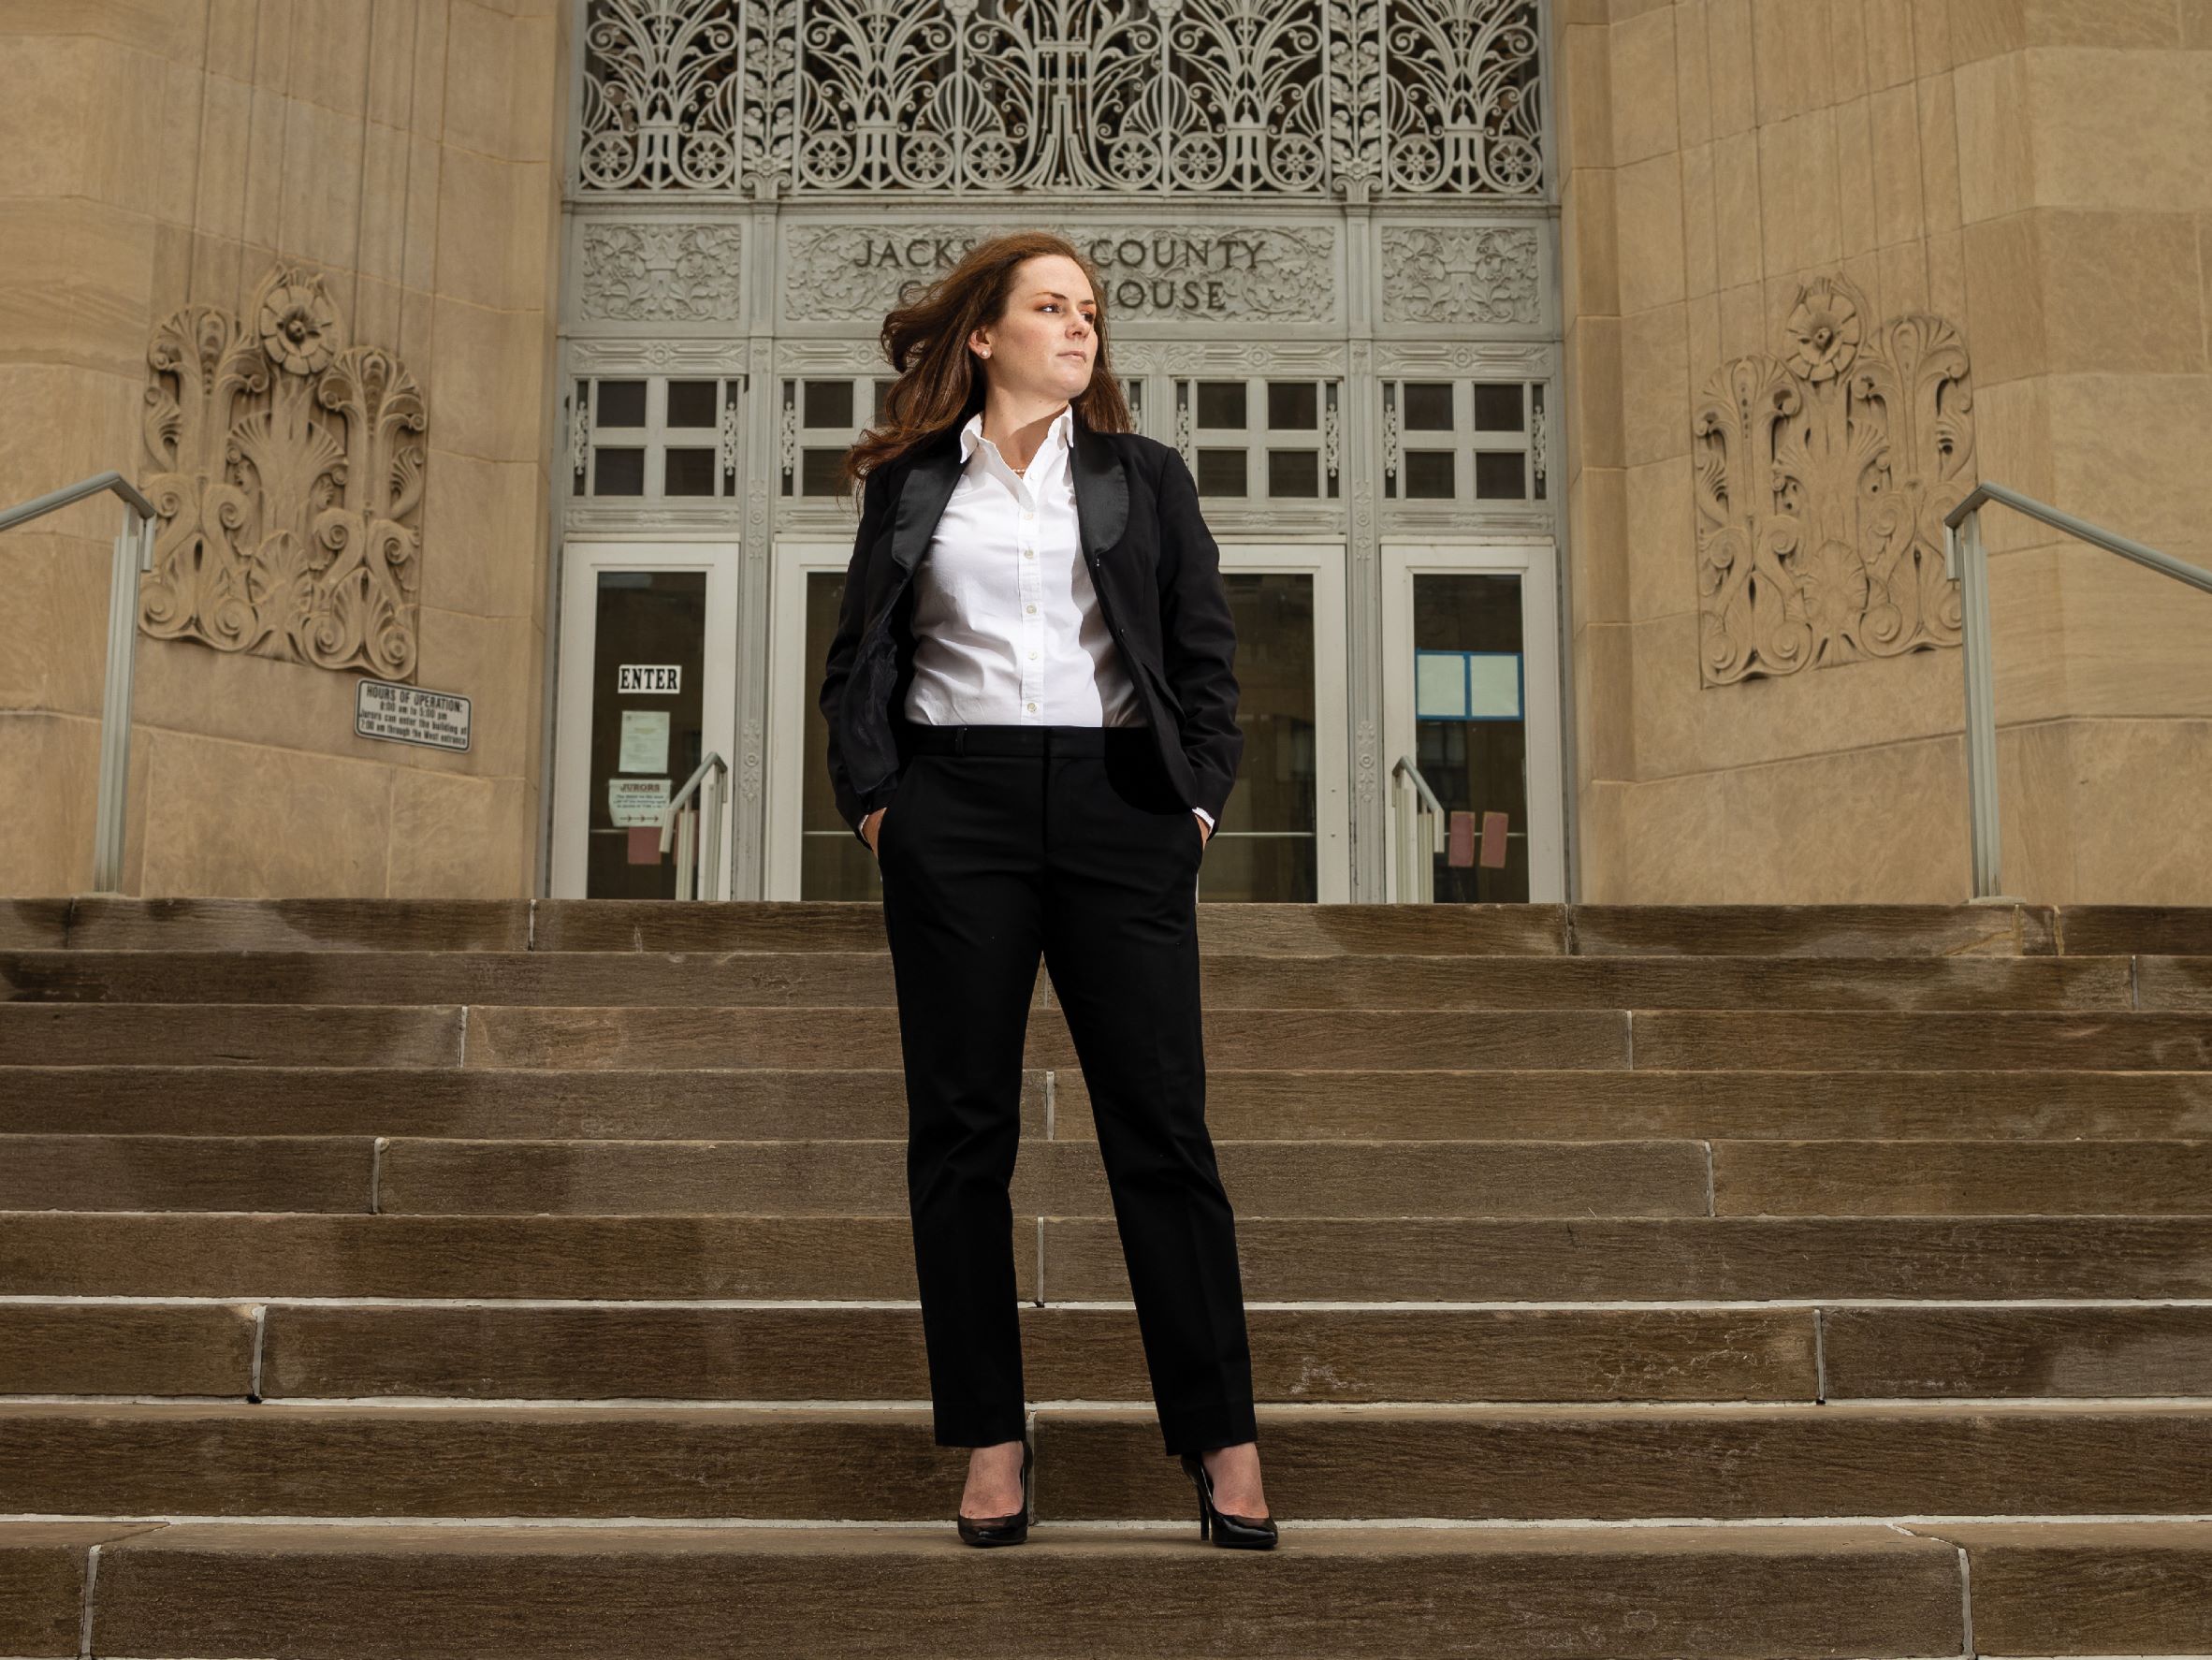 Audrey McCormick stands on the steps of the Jackson County Courthouse in a powerful pose with her hands in her pocket. She is looking off to the side with a serious expression. The wind is blowing her hair